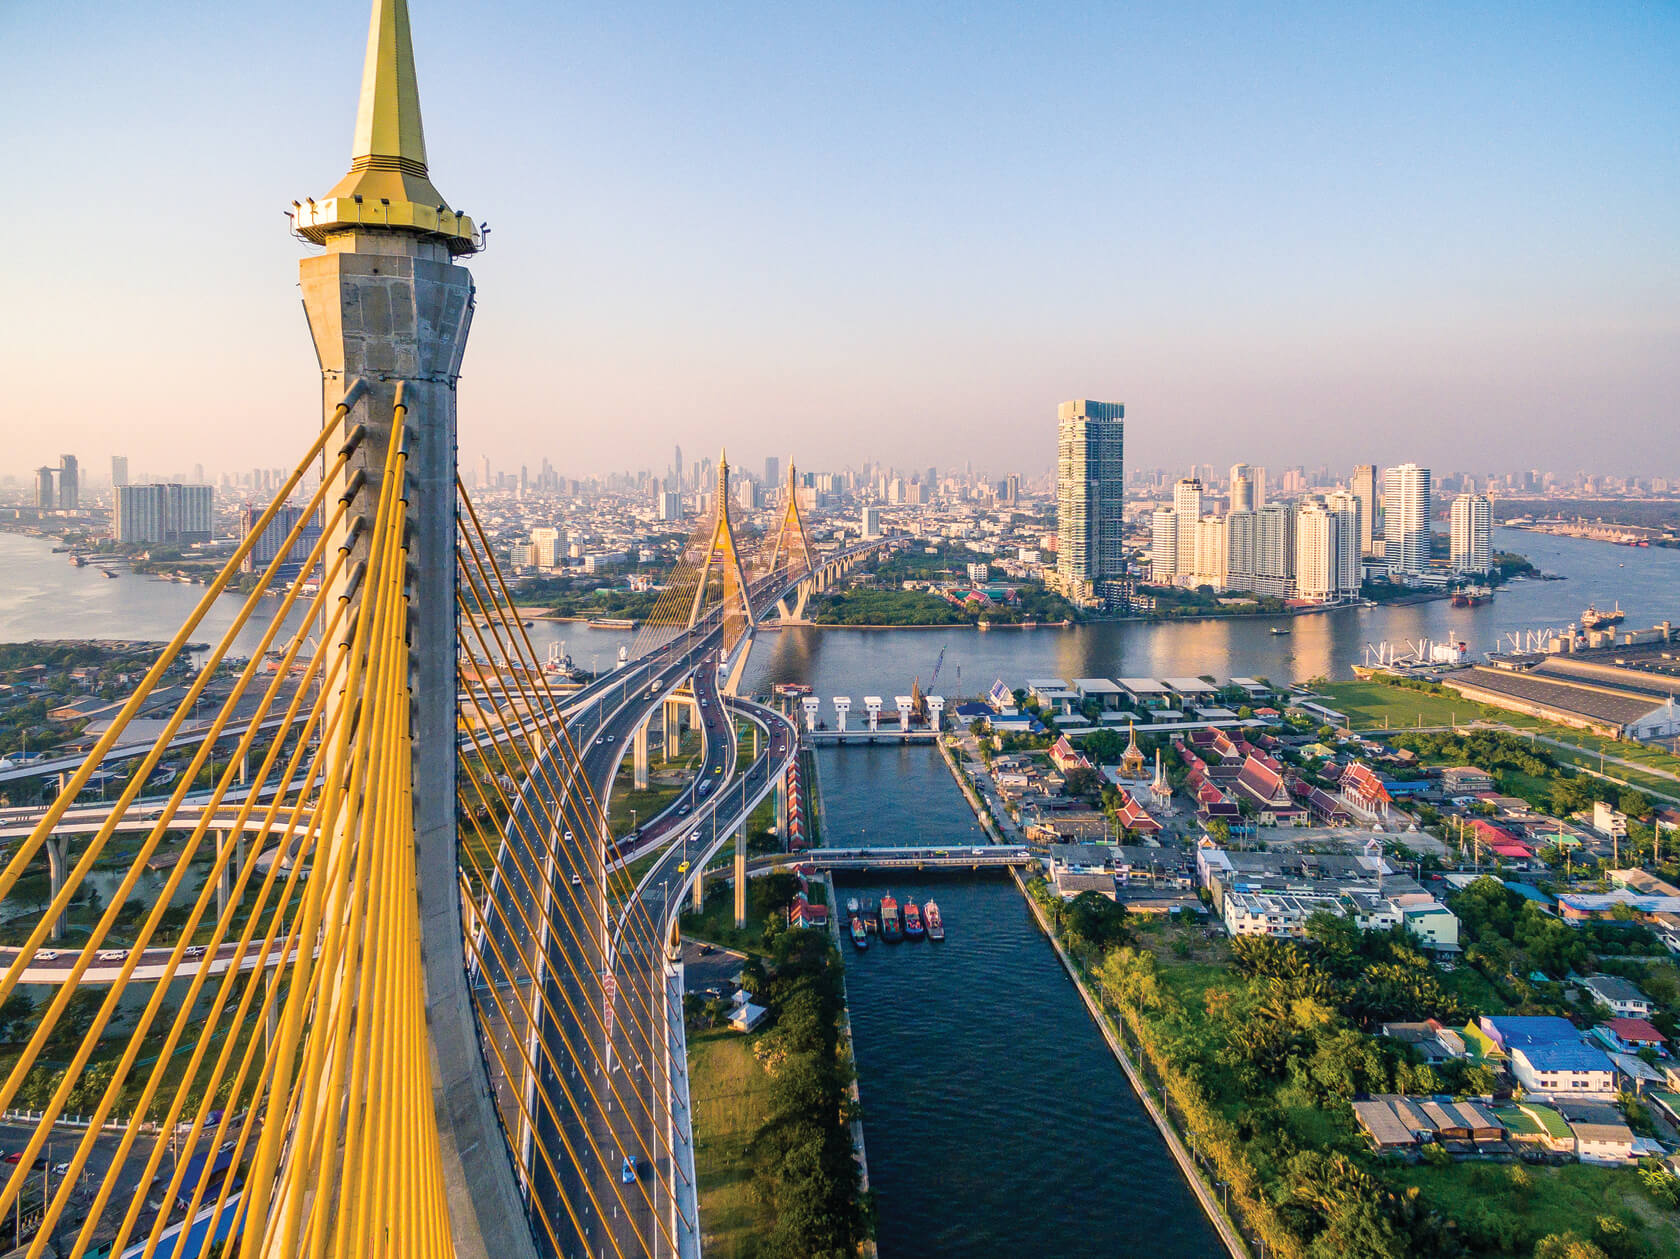 A an aerial view of Bangkok overlooking a two leveled bridged